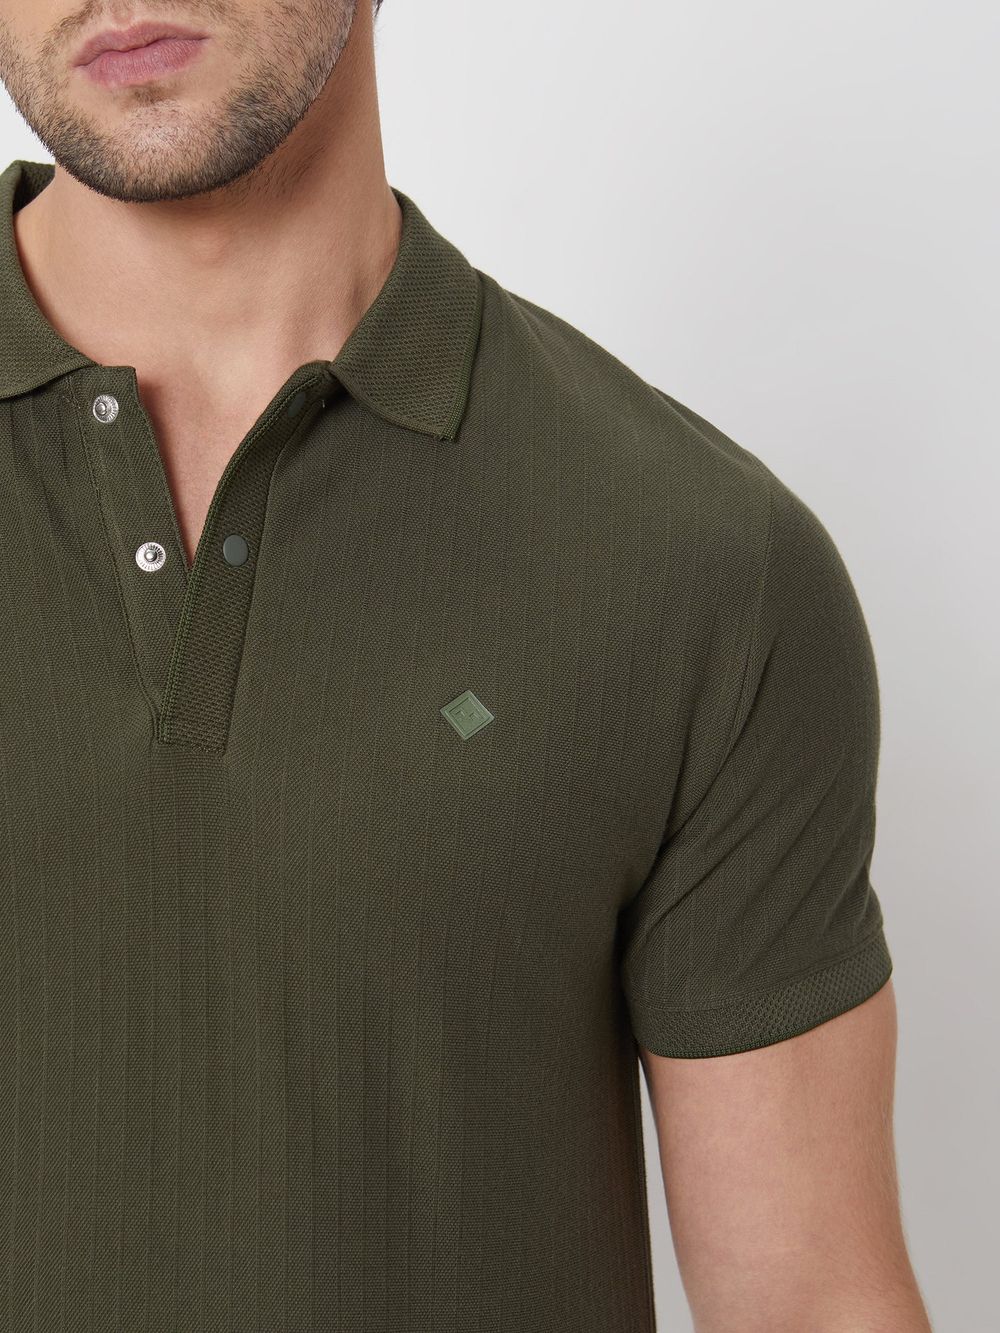 Olive Textured Plain Slim Fit Casual Polo T-Shirt